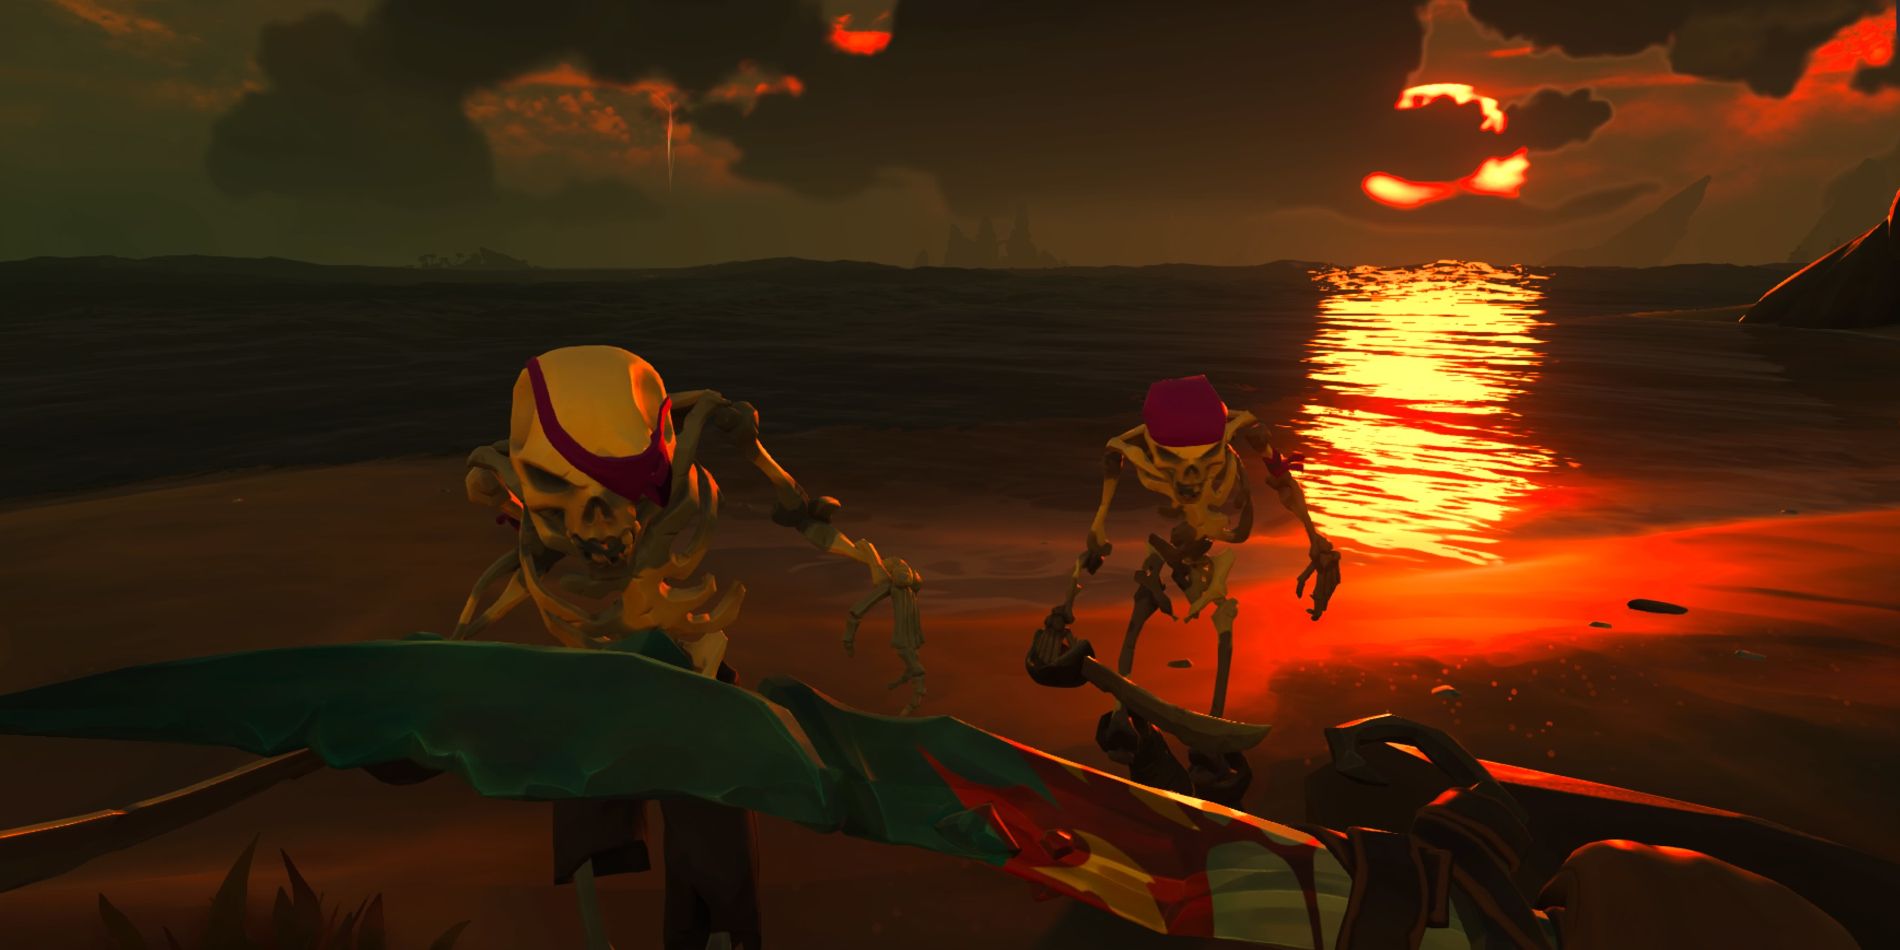 Gameplay screenshot Sea of Thieves PlayStation 5 guarding with cutlass sword while two skeletons approach while standing on a beach with the sunsetting behind them.